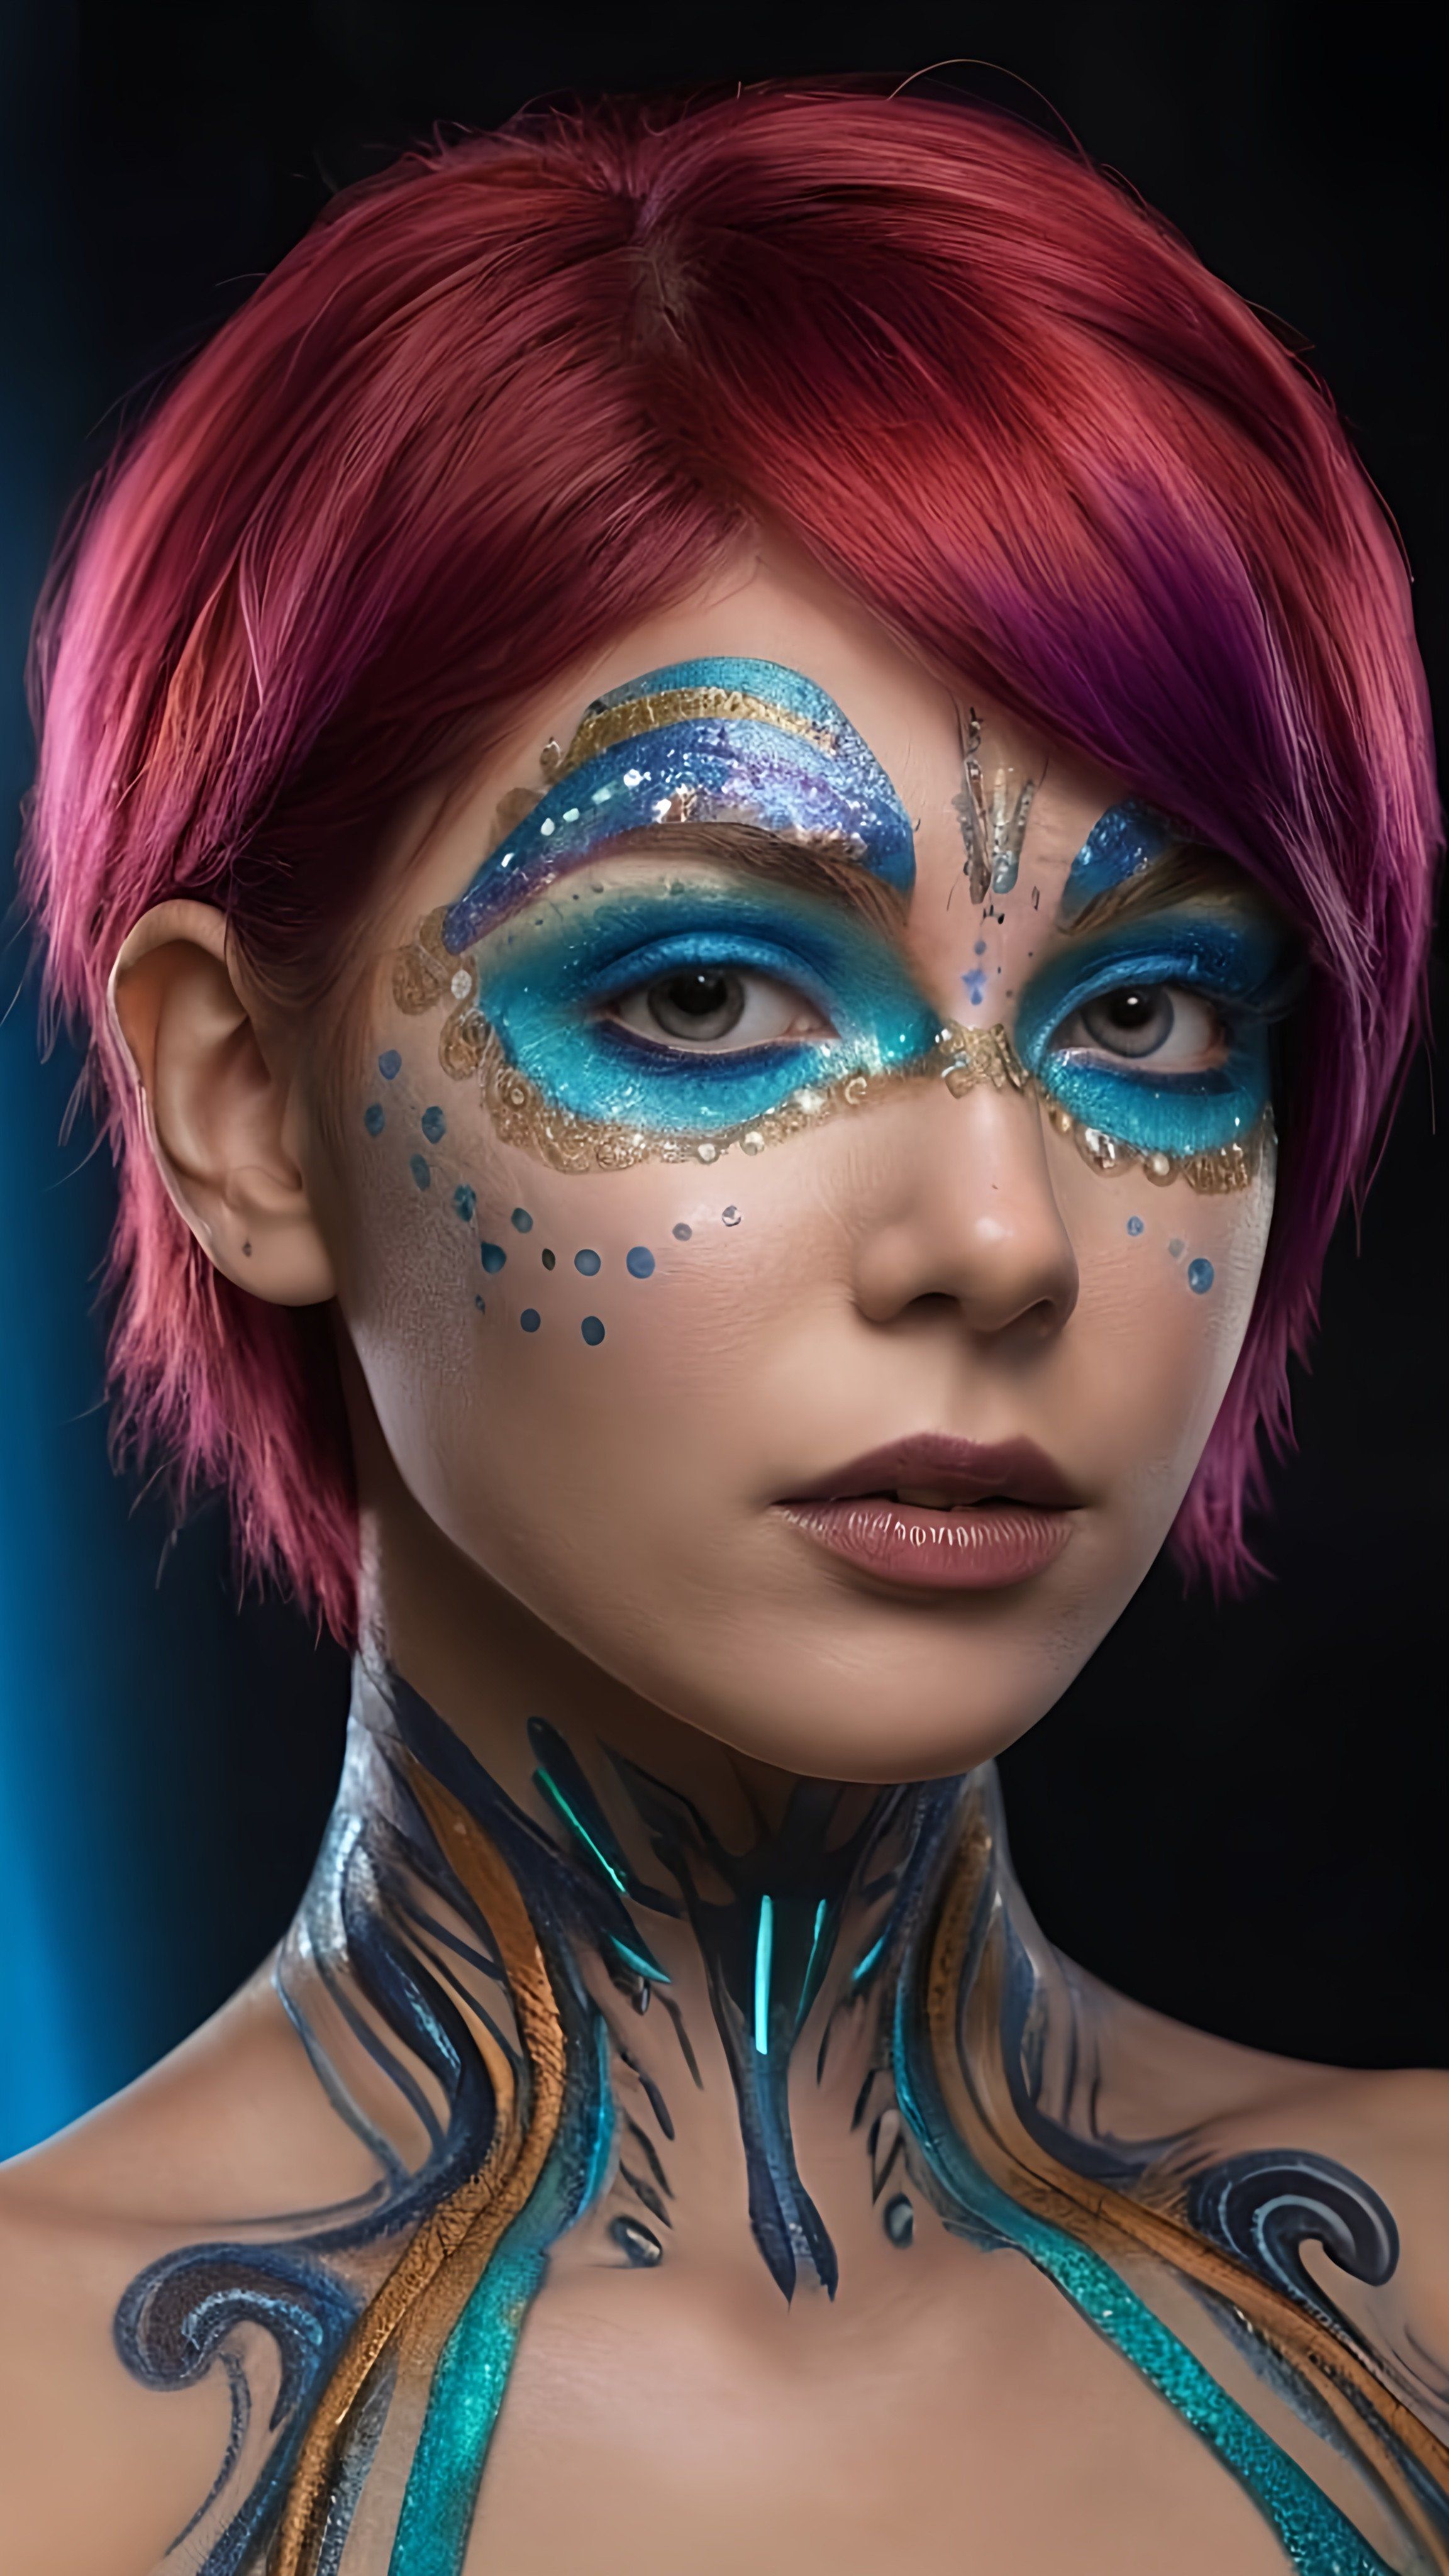 Prompt: a woman with a face painted with blue and gold glitters, affinity photo, a character portrait